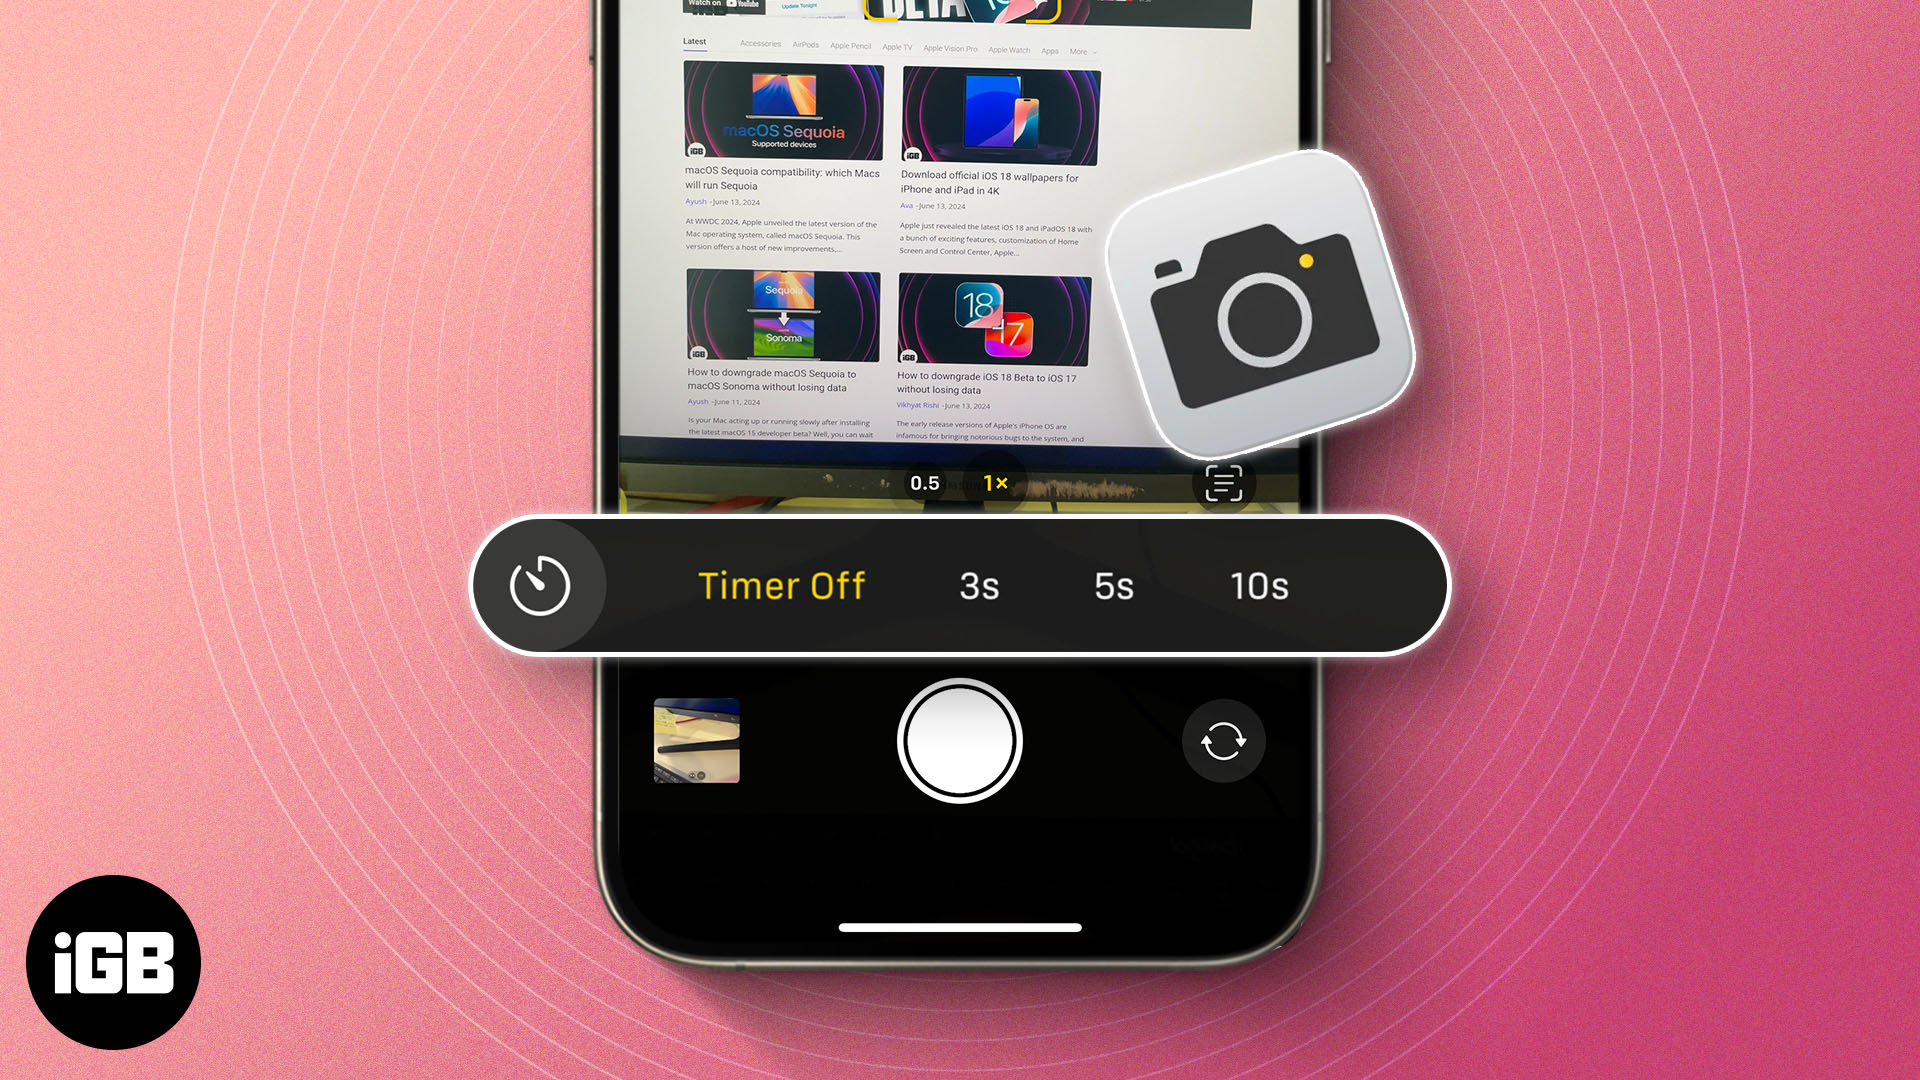 How to set timer on iPhone camera to take hands-free photos